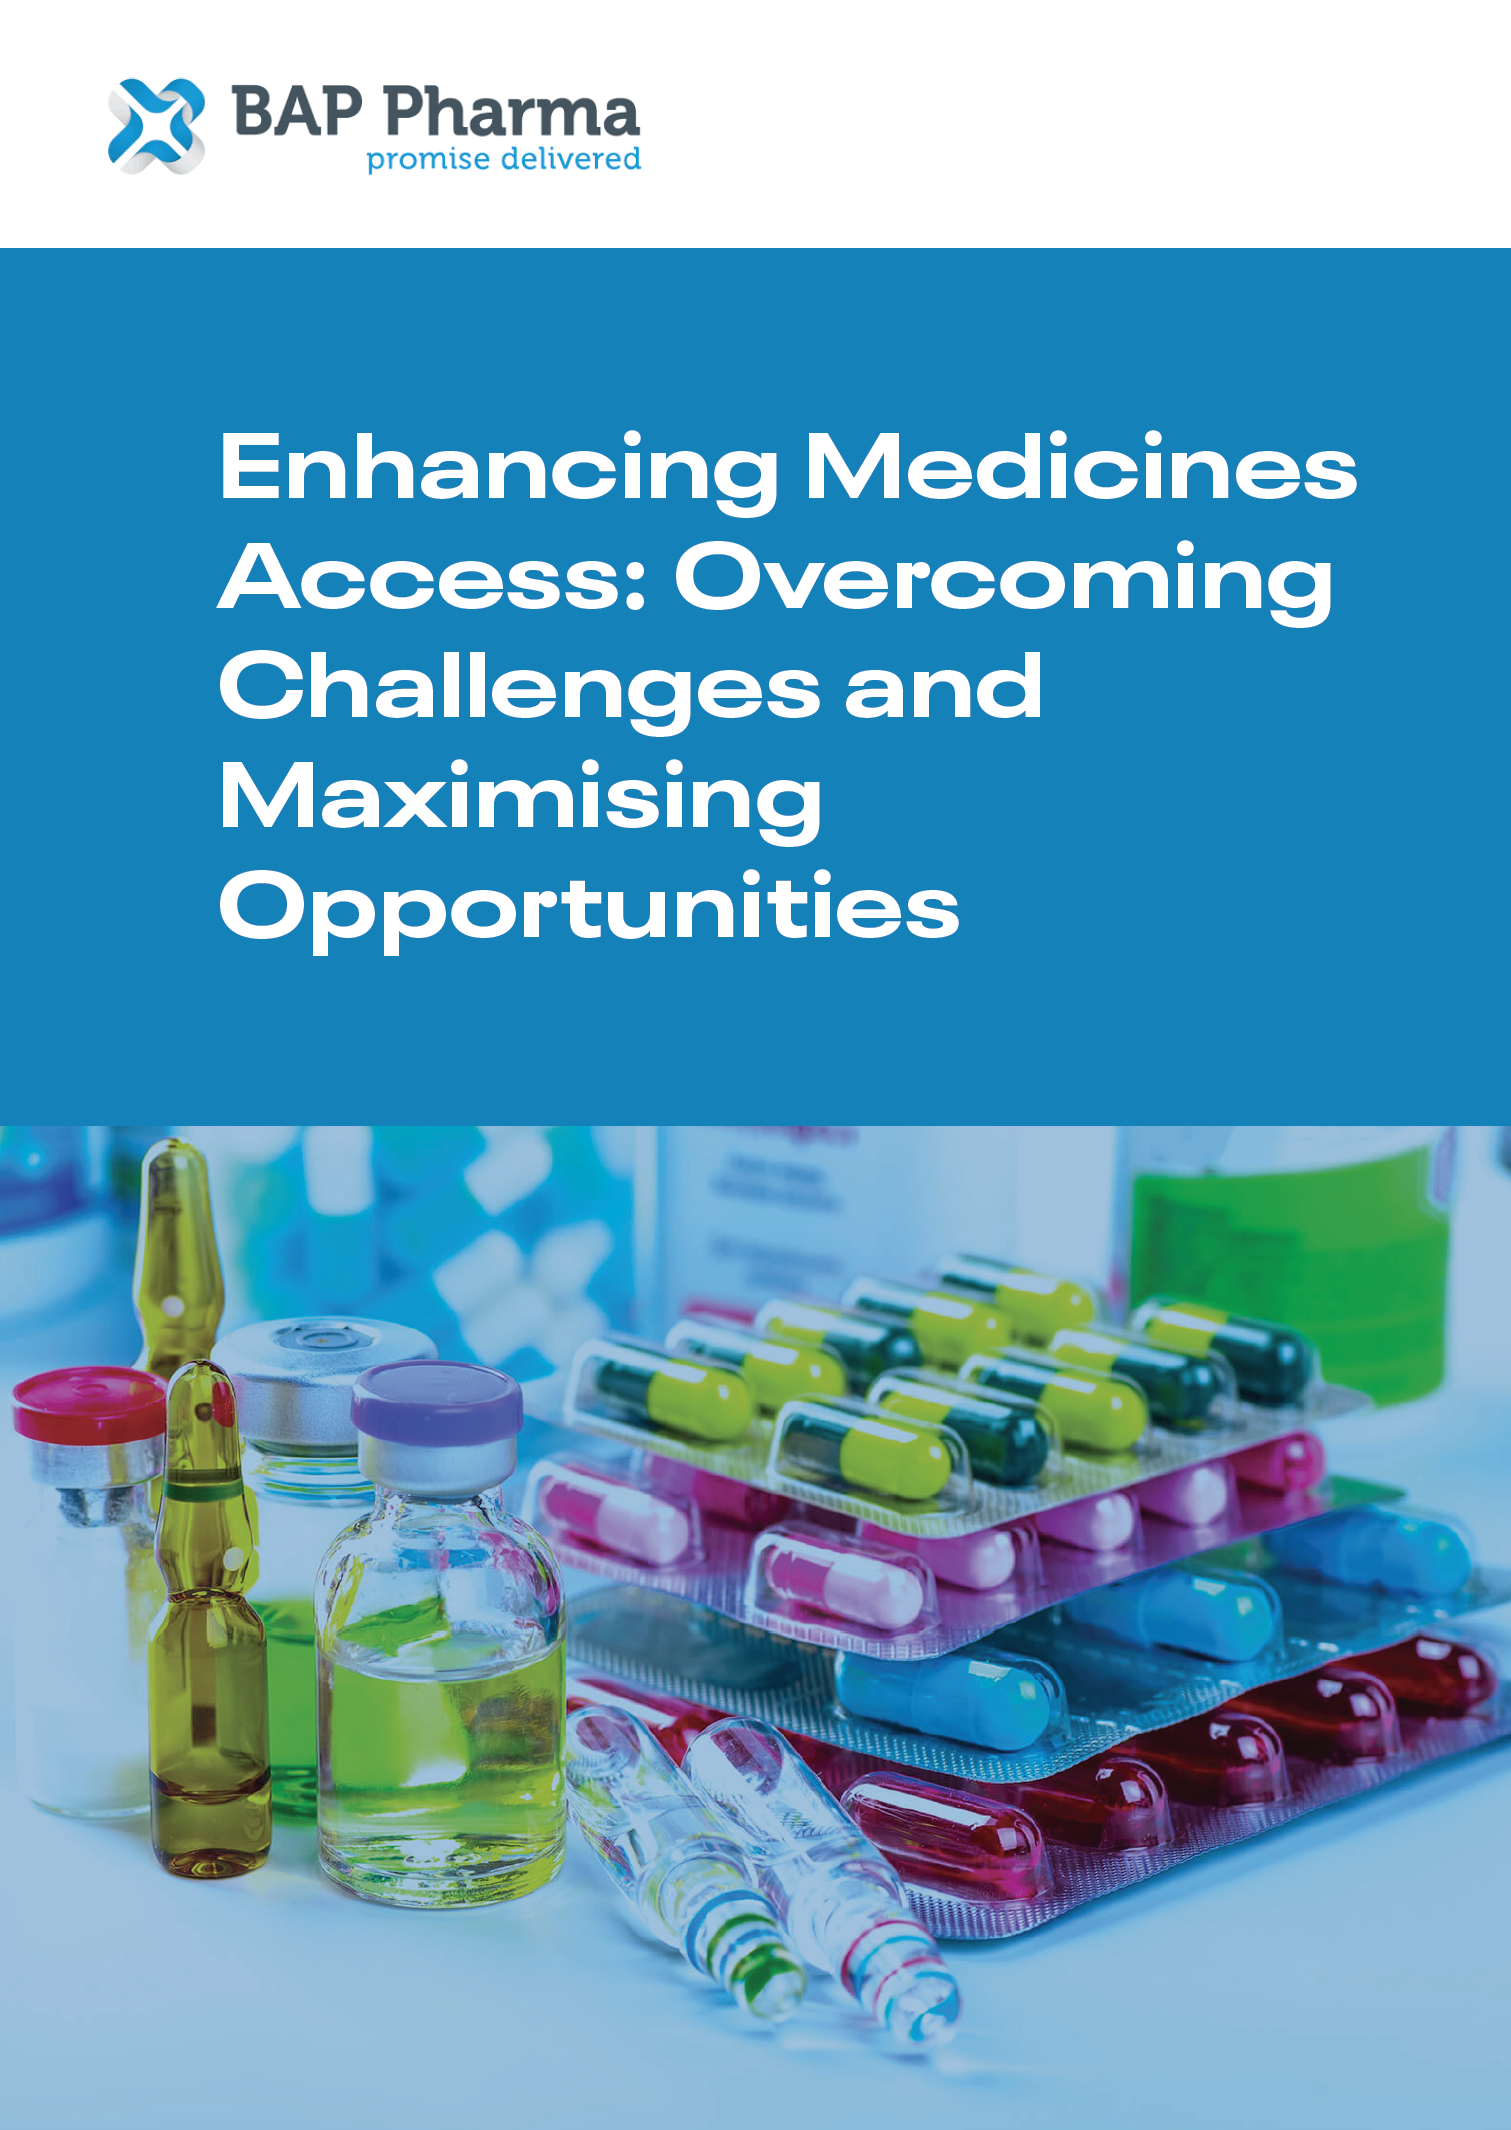 Enhancing medicines access: Overcoming Challenges and Maximsing Opportunities